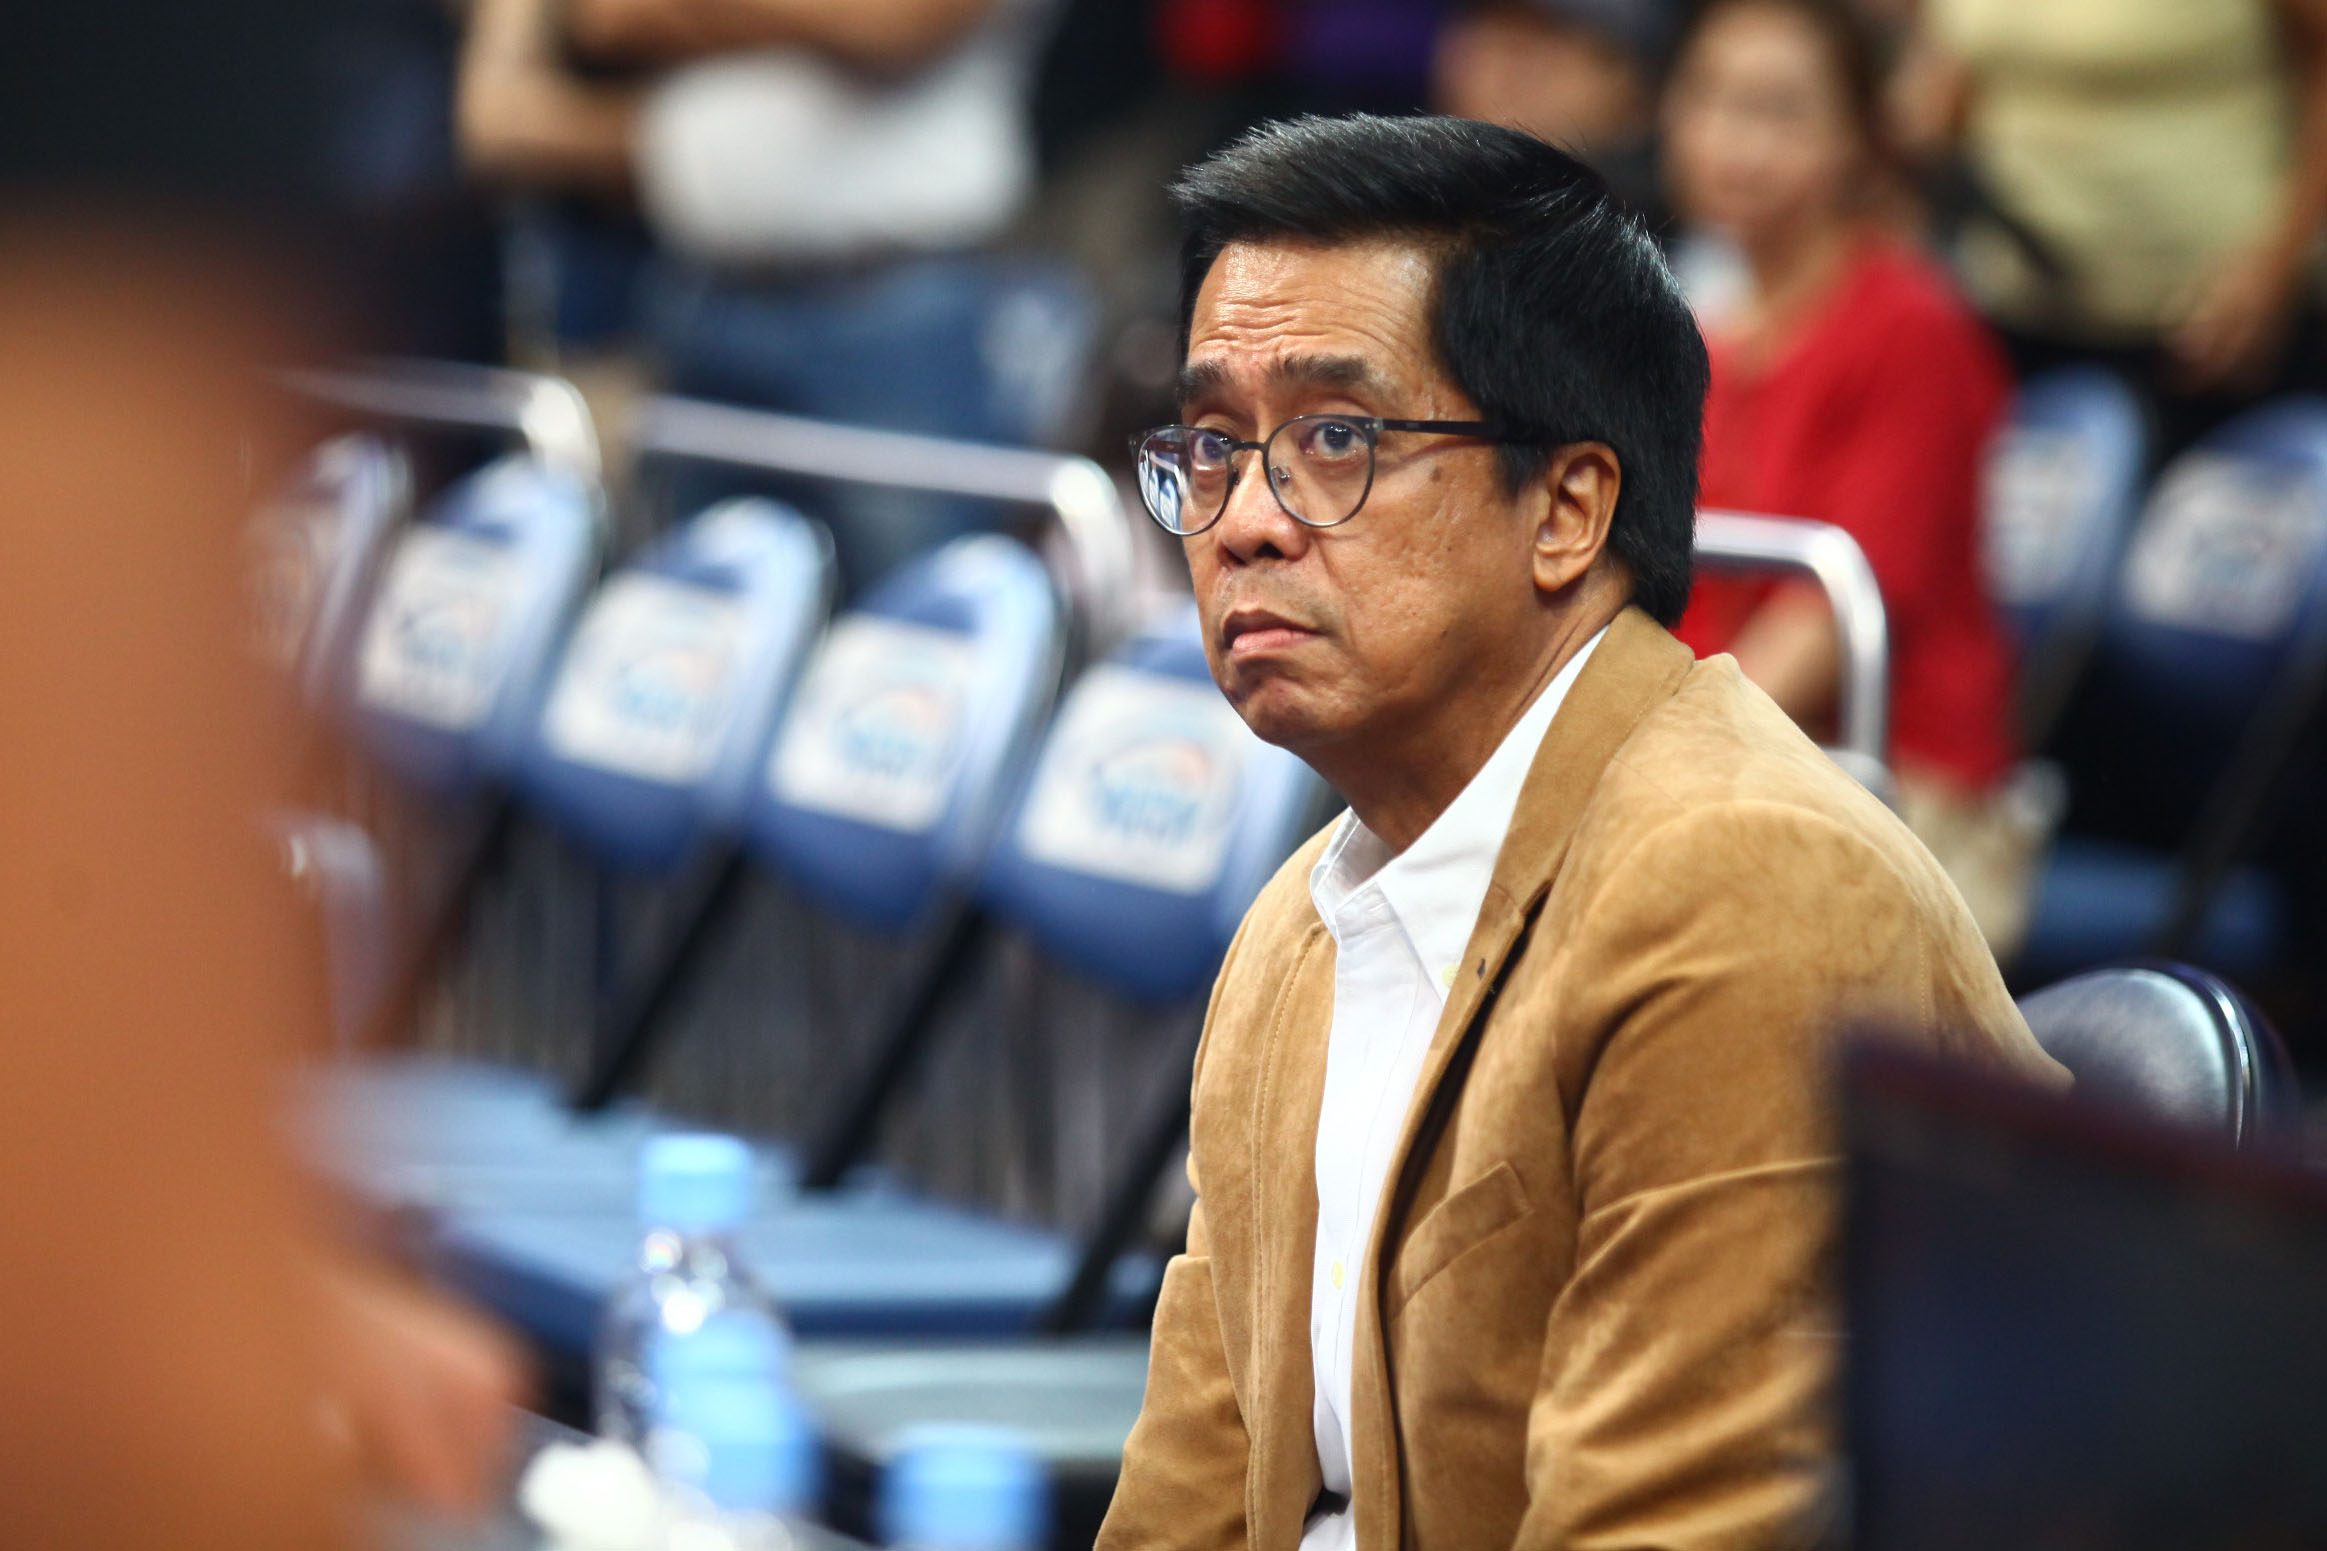 Narvasa to meet with PBA refs, Ginebra foregoes protest